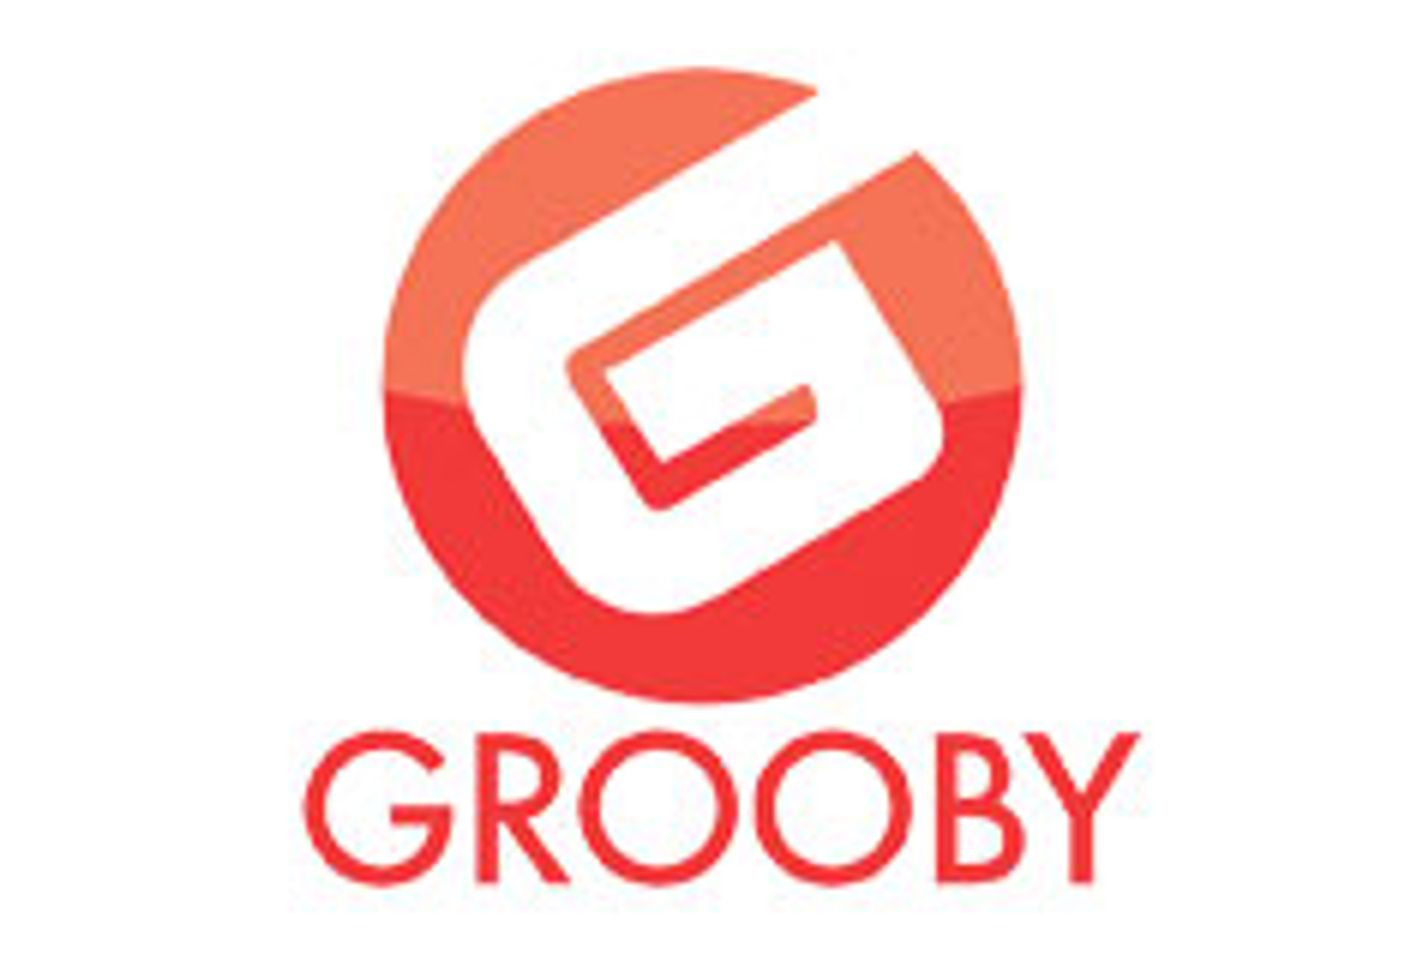 Grooby Launches BBW T-Girl Site